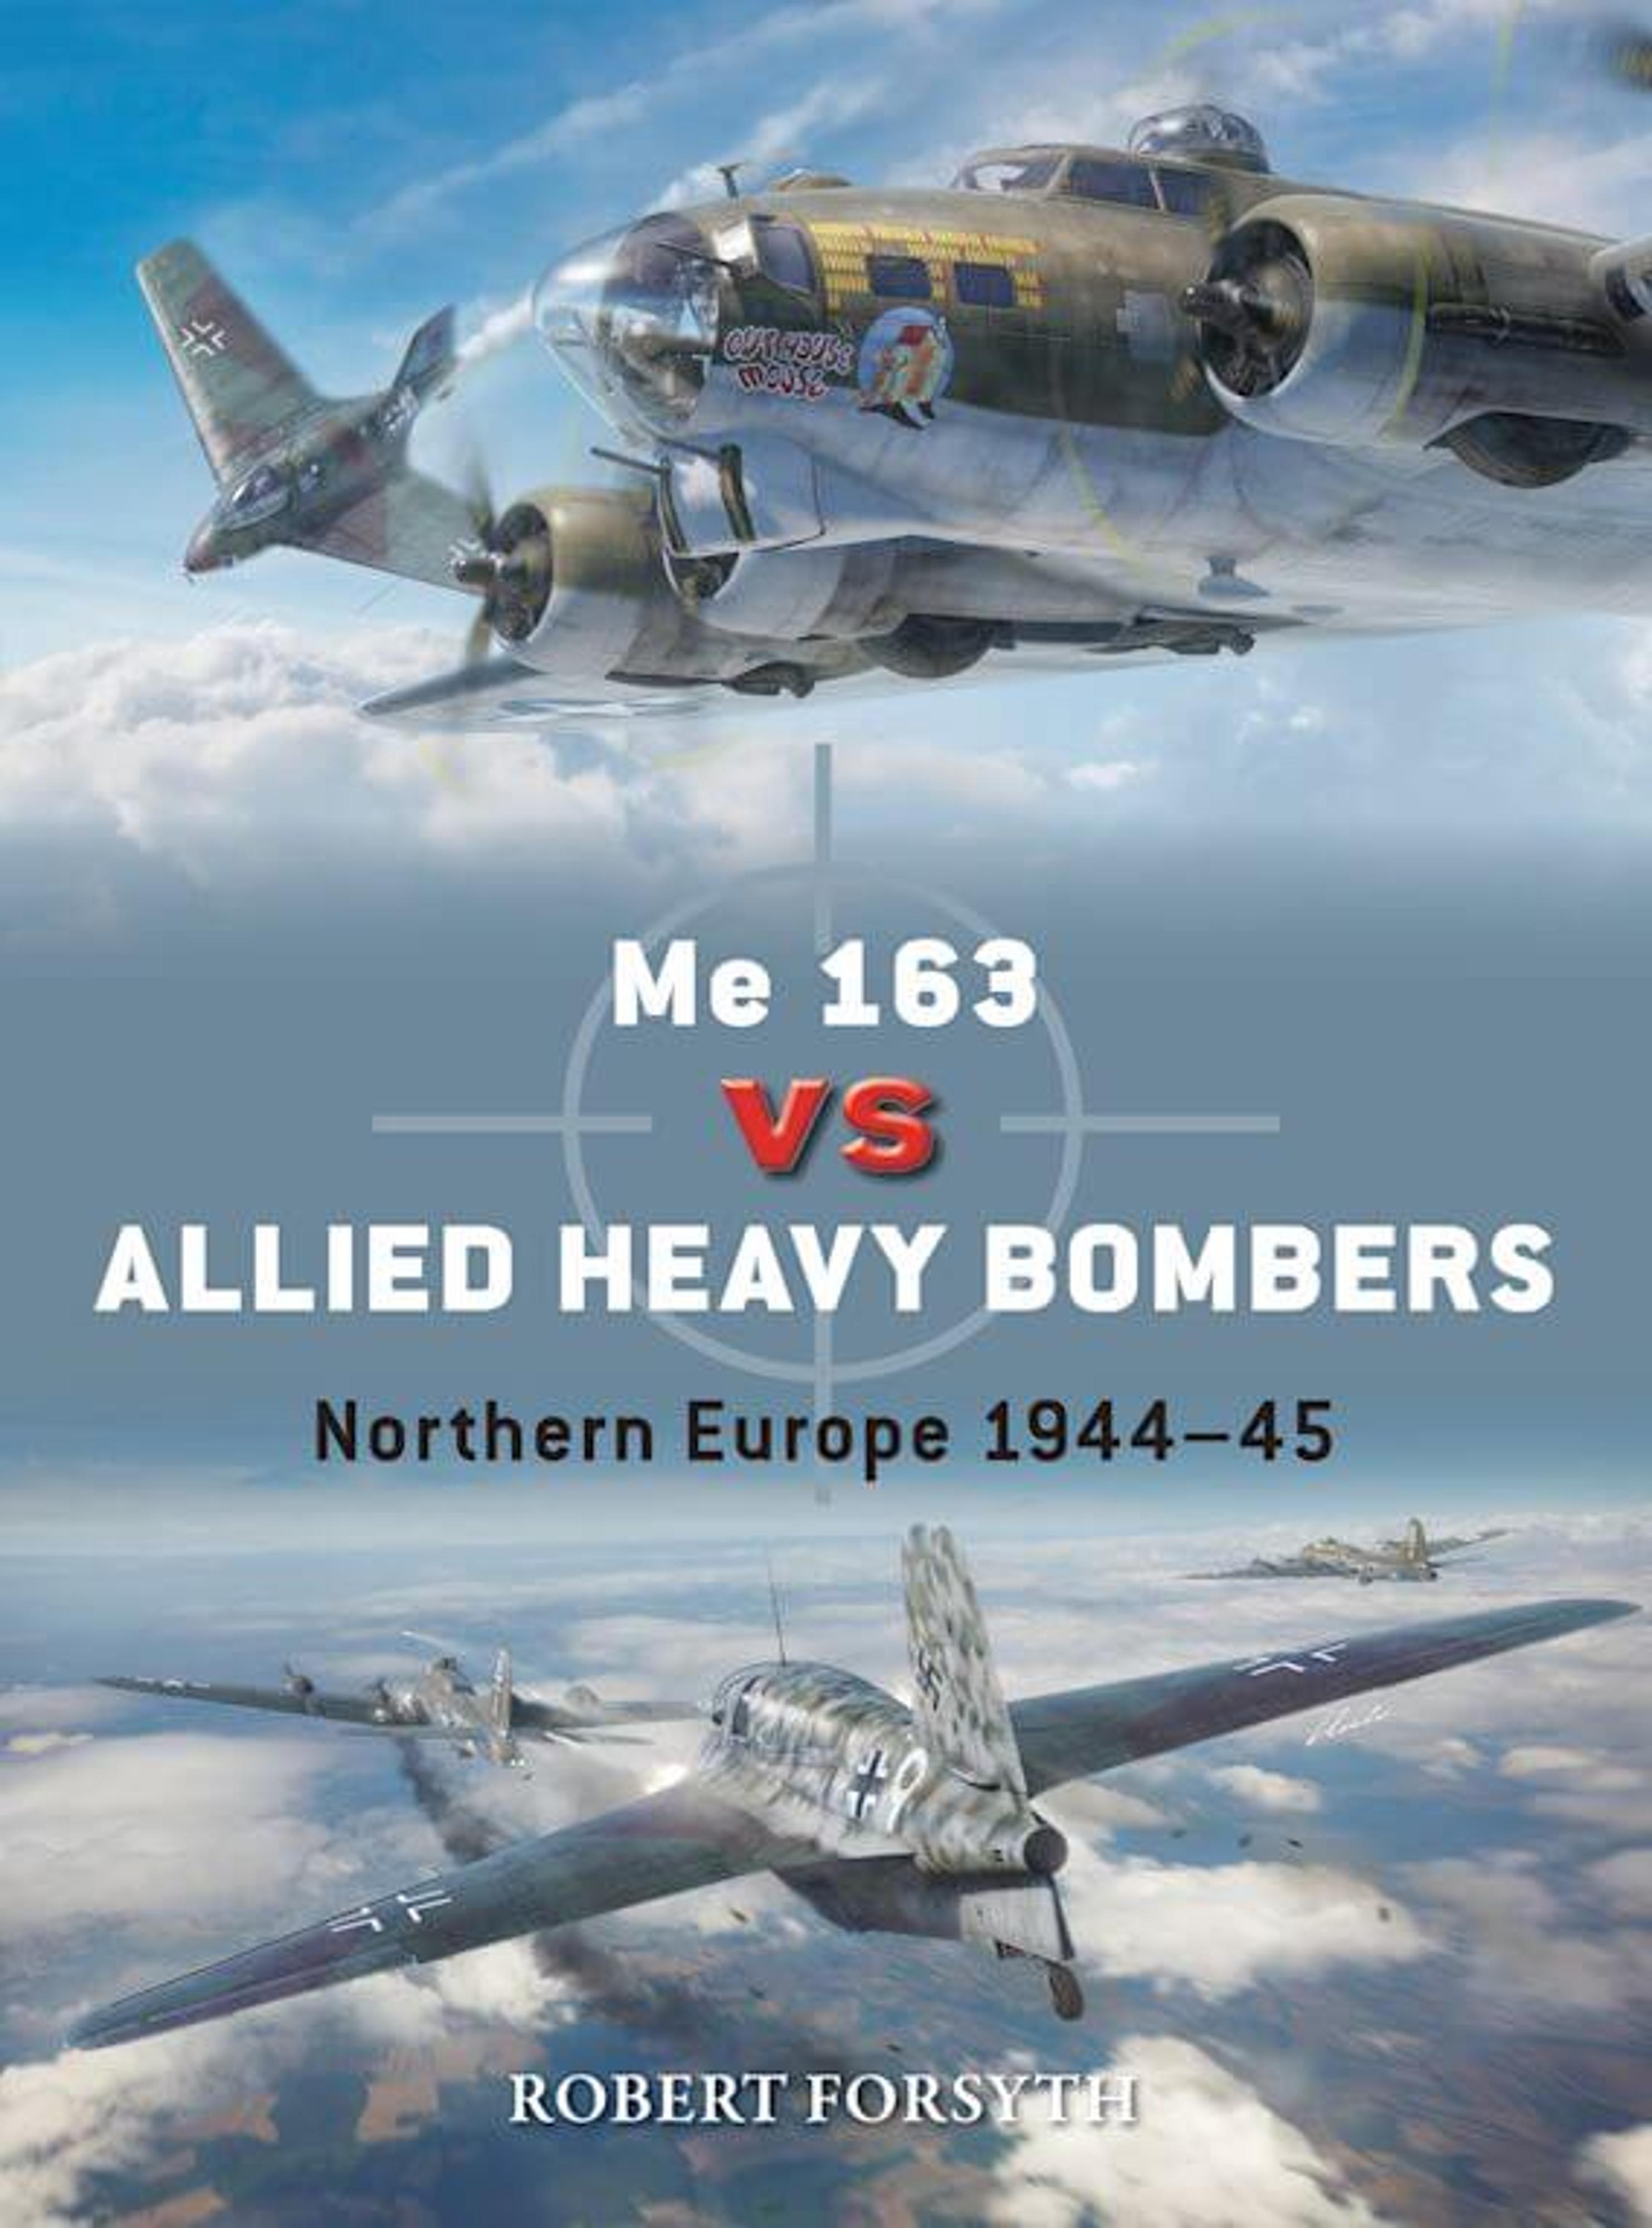 Me 163 vs Allied Heavy Bombers: Northern Europe 1944-45